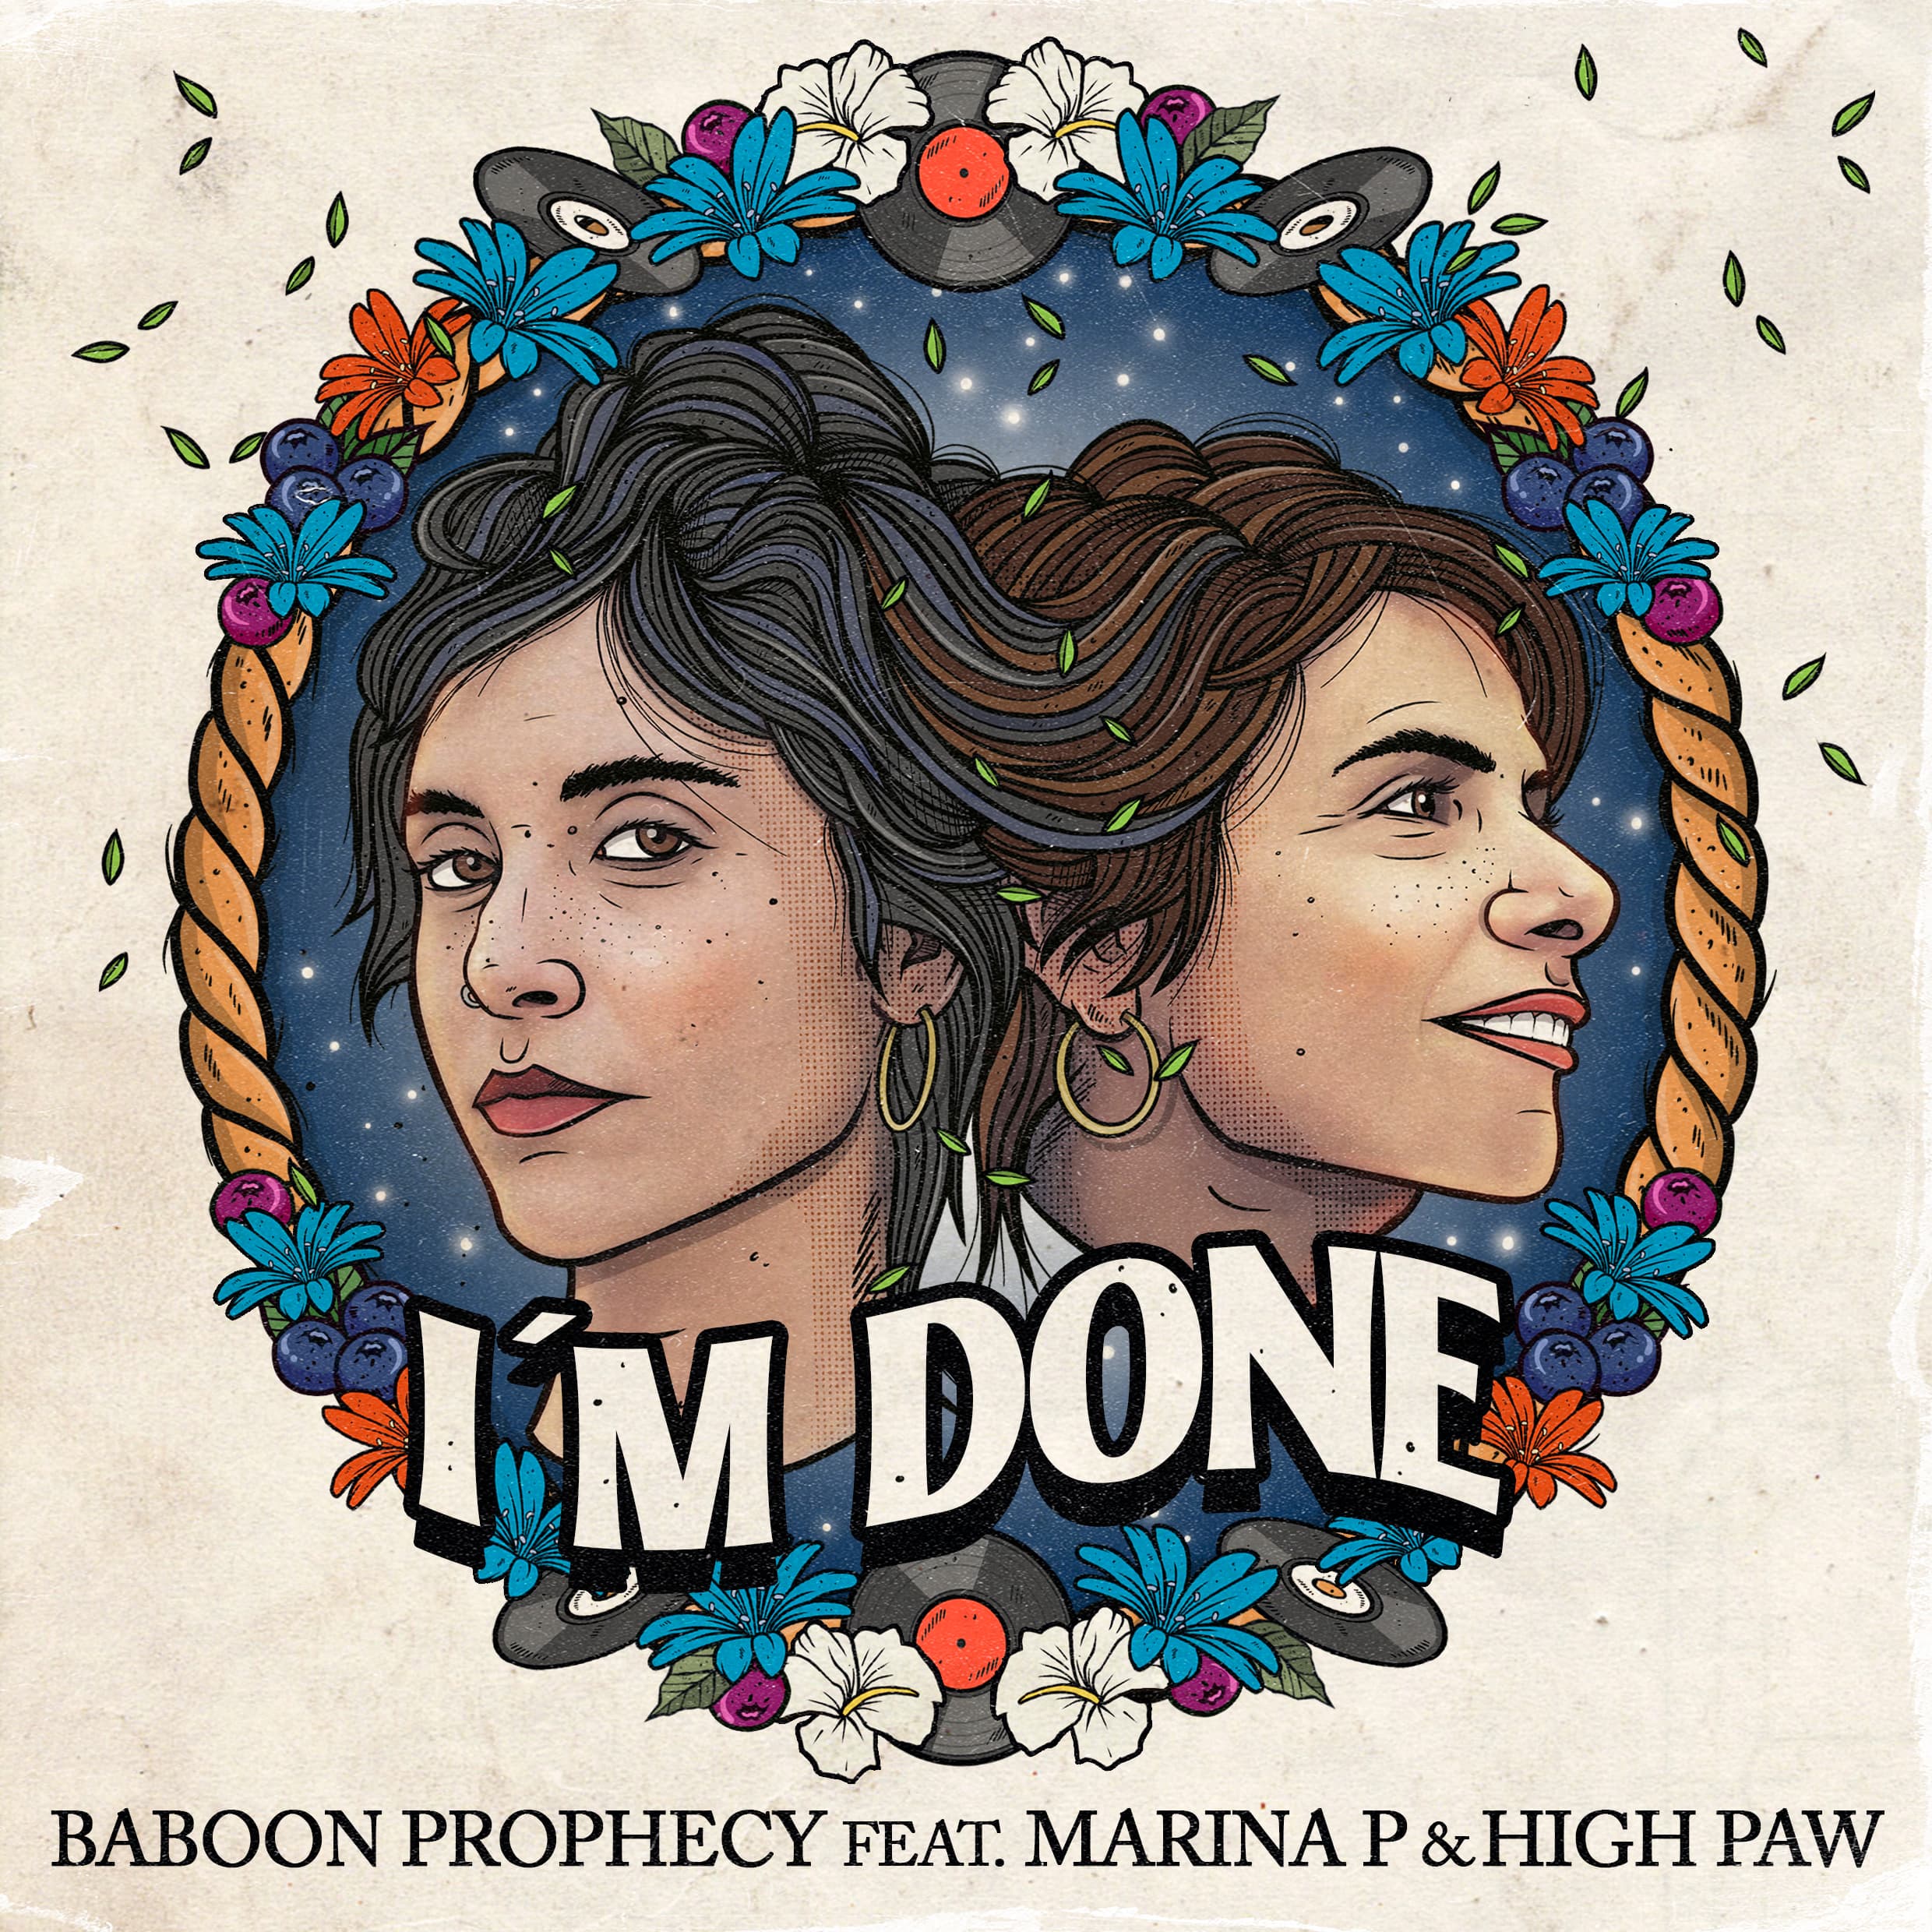 Baboon Prophechy feat. Marina P & High Paw “I’m Done” (hiphop/reggae)